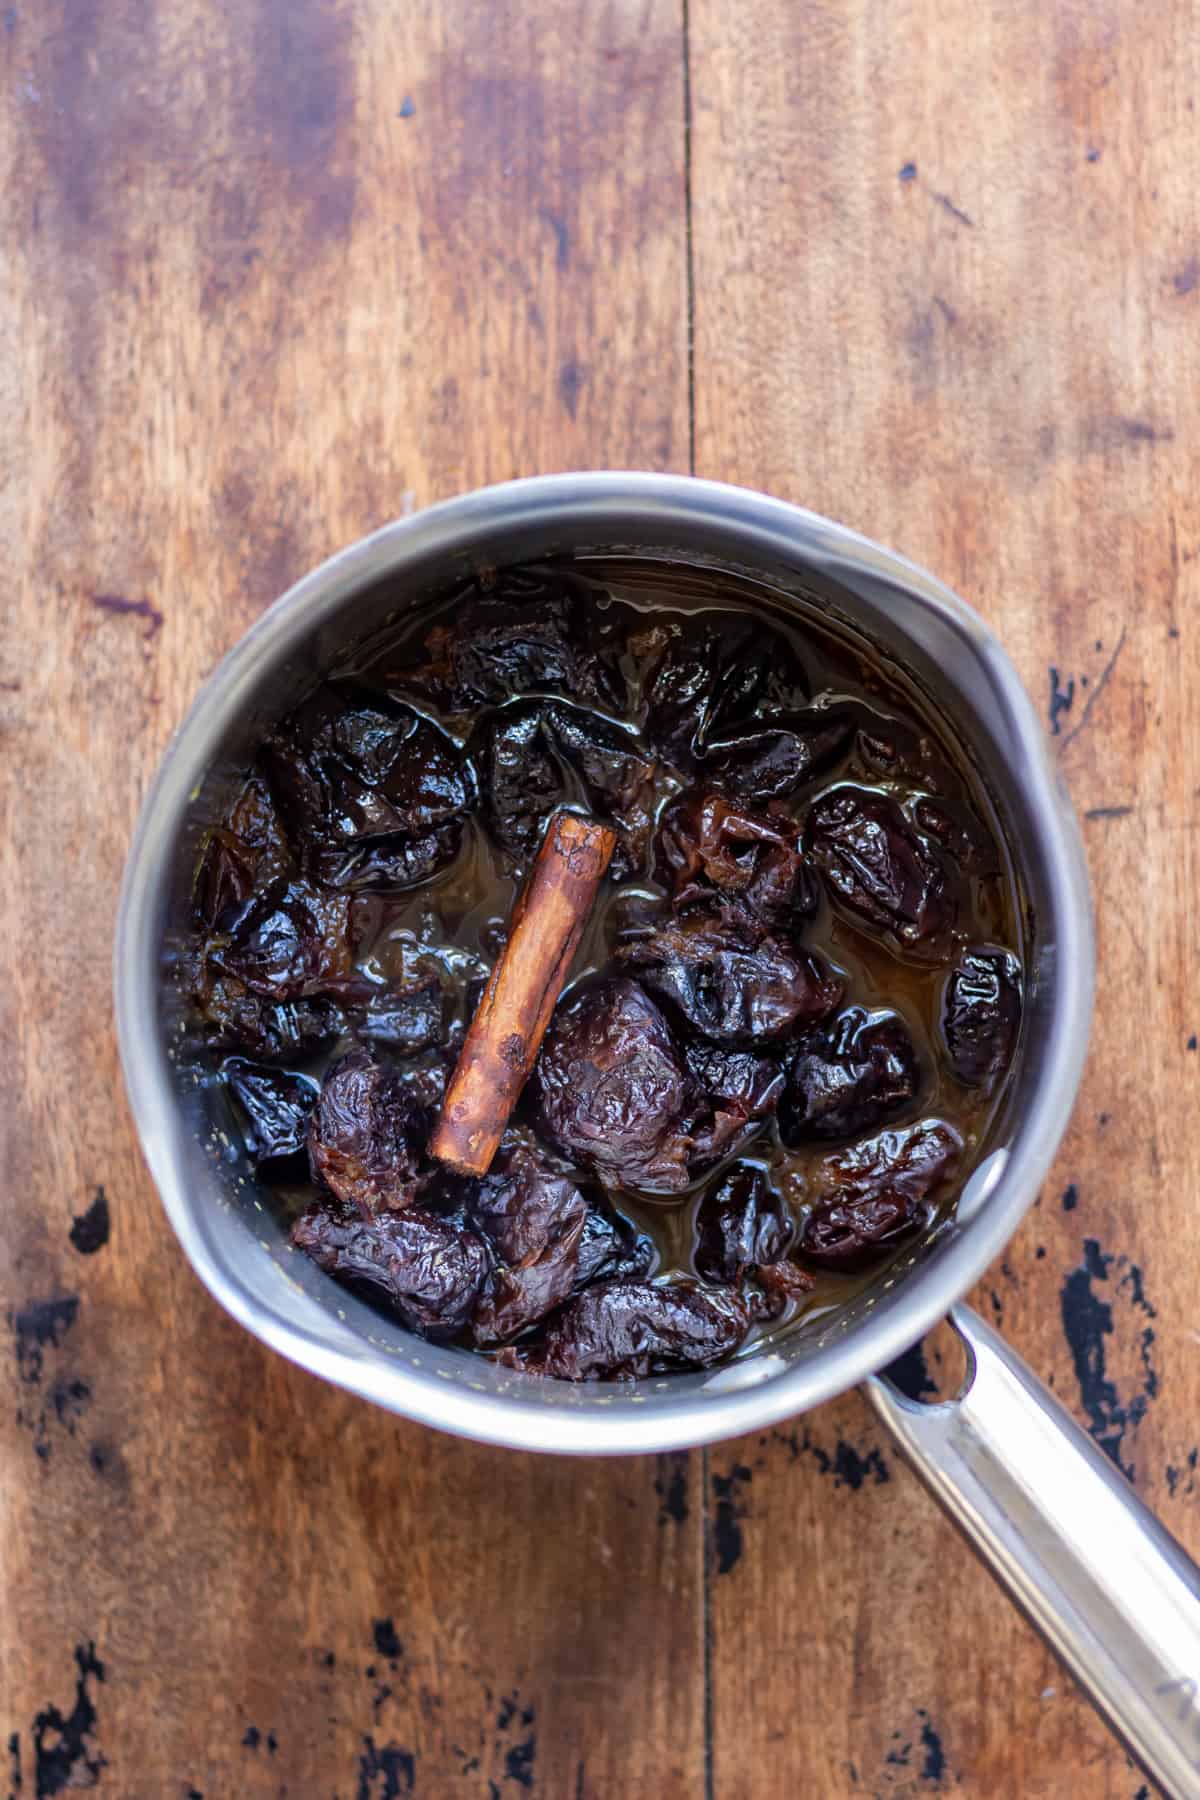 Pot of cooked prune compote with a cinnamon stick.